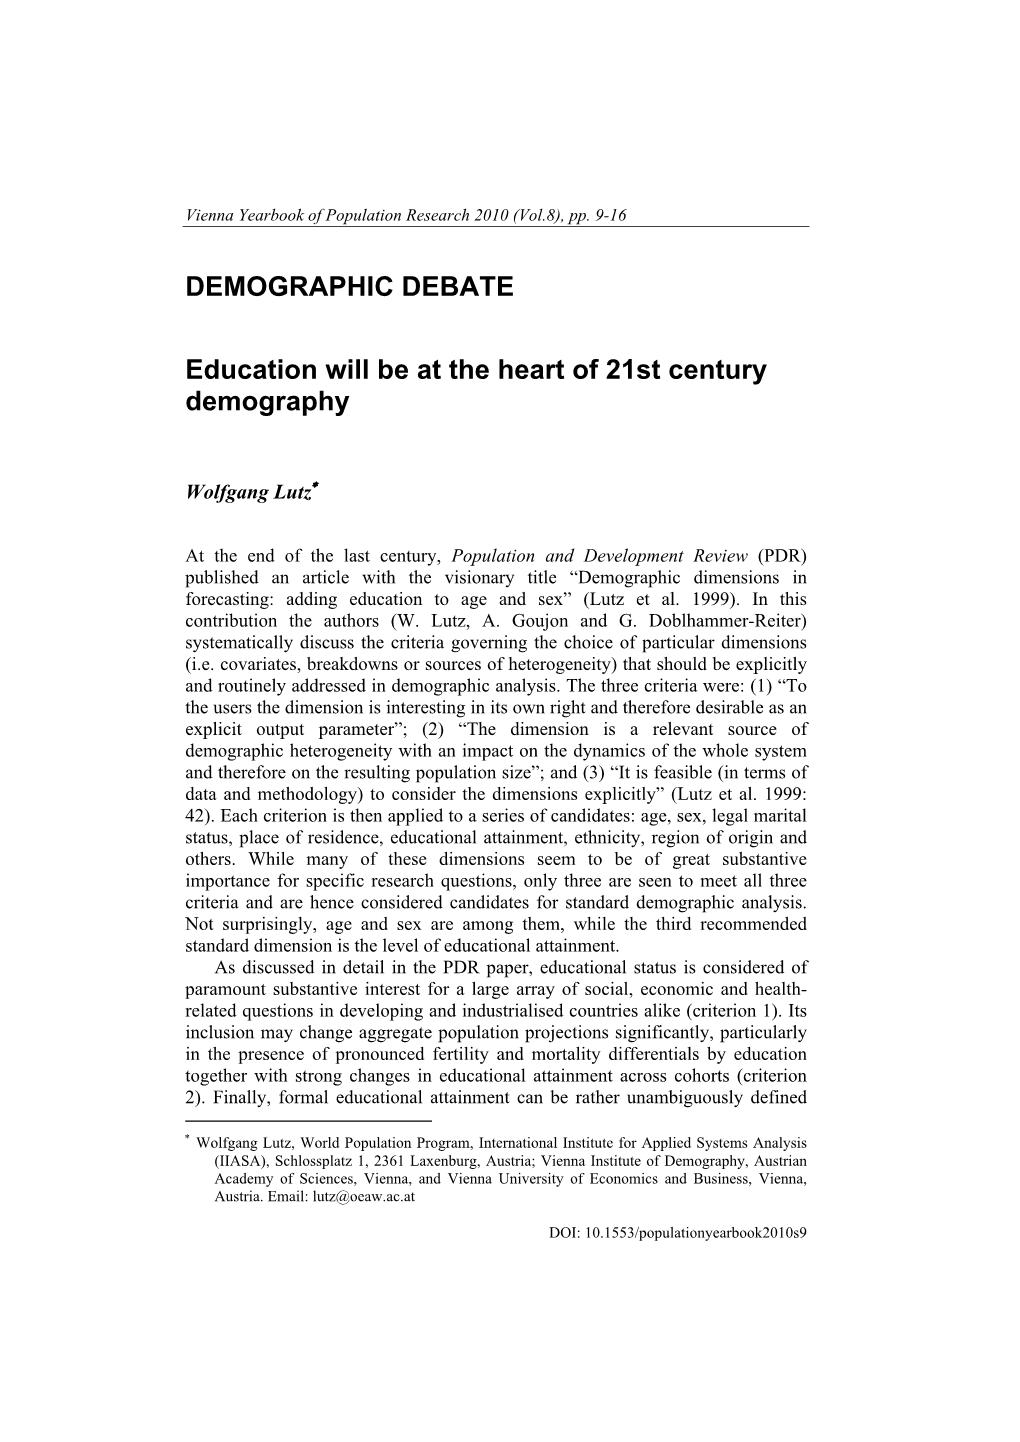 Education Will Be at the Heart of 21St Century Demography